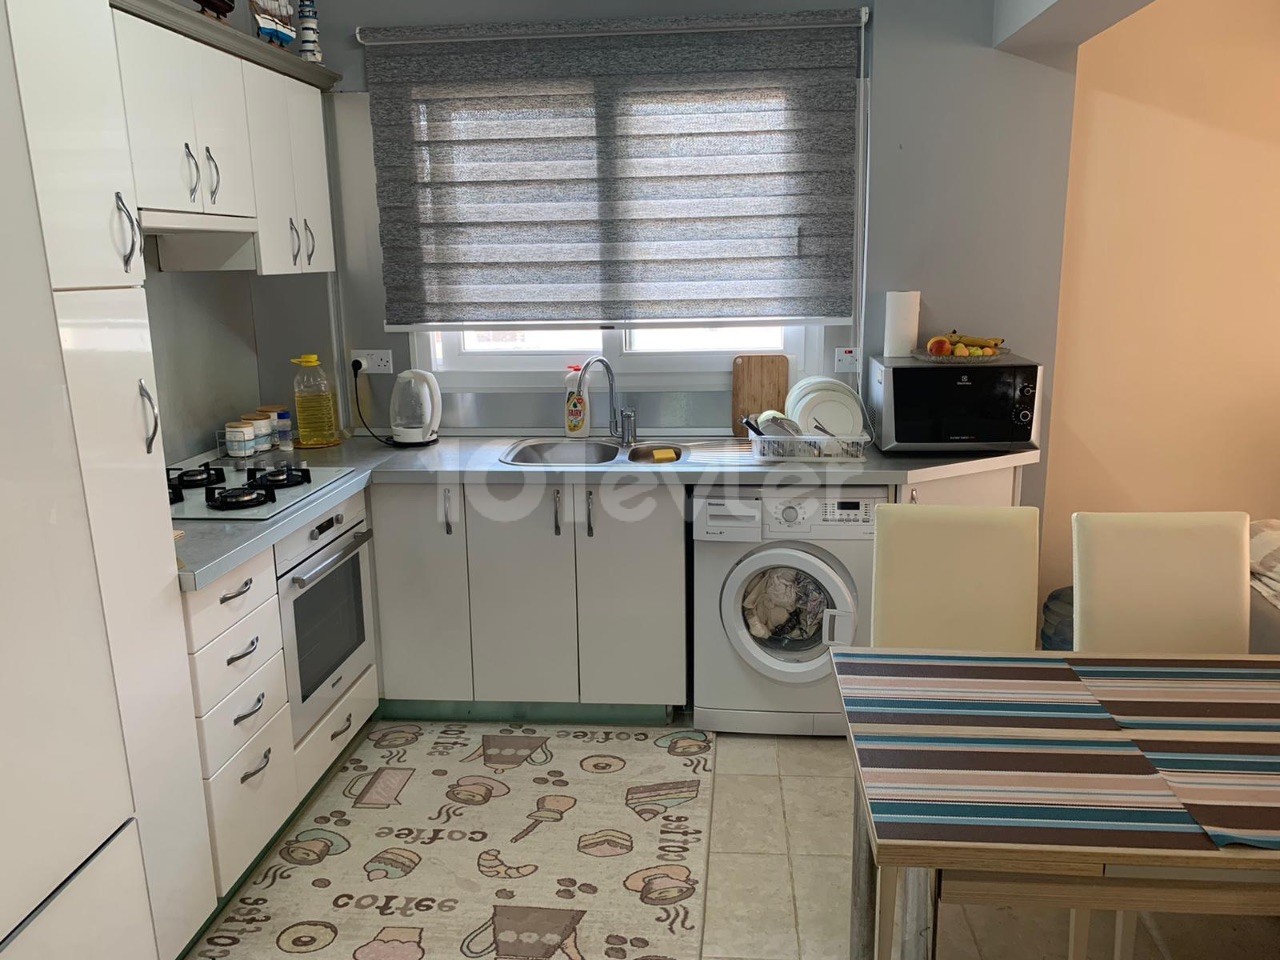 2 bedroom apartment with large terrace in Central Kyrenia